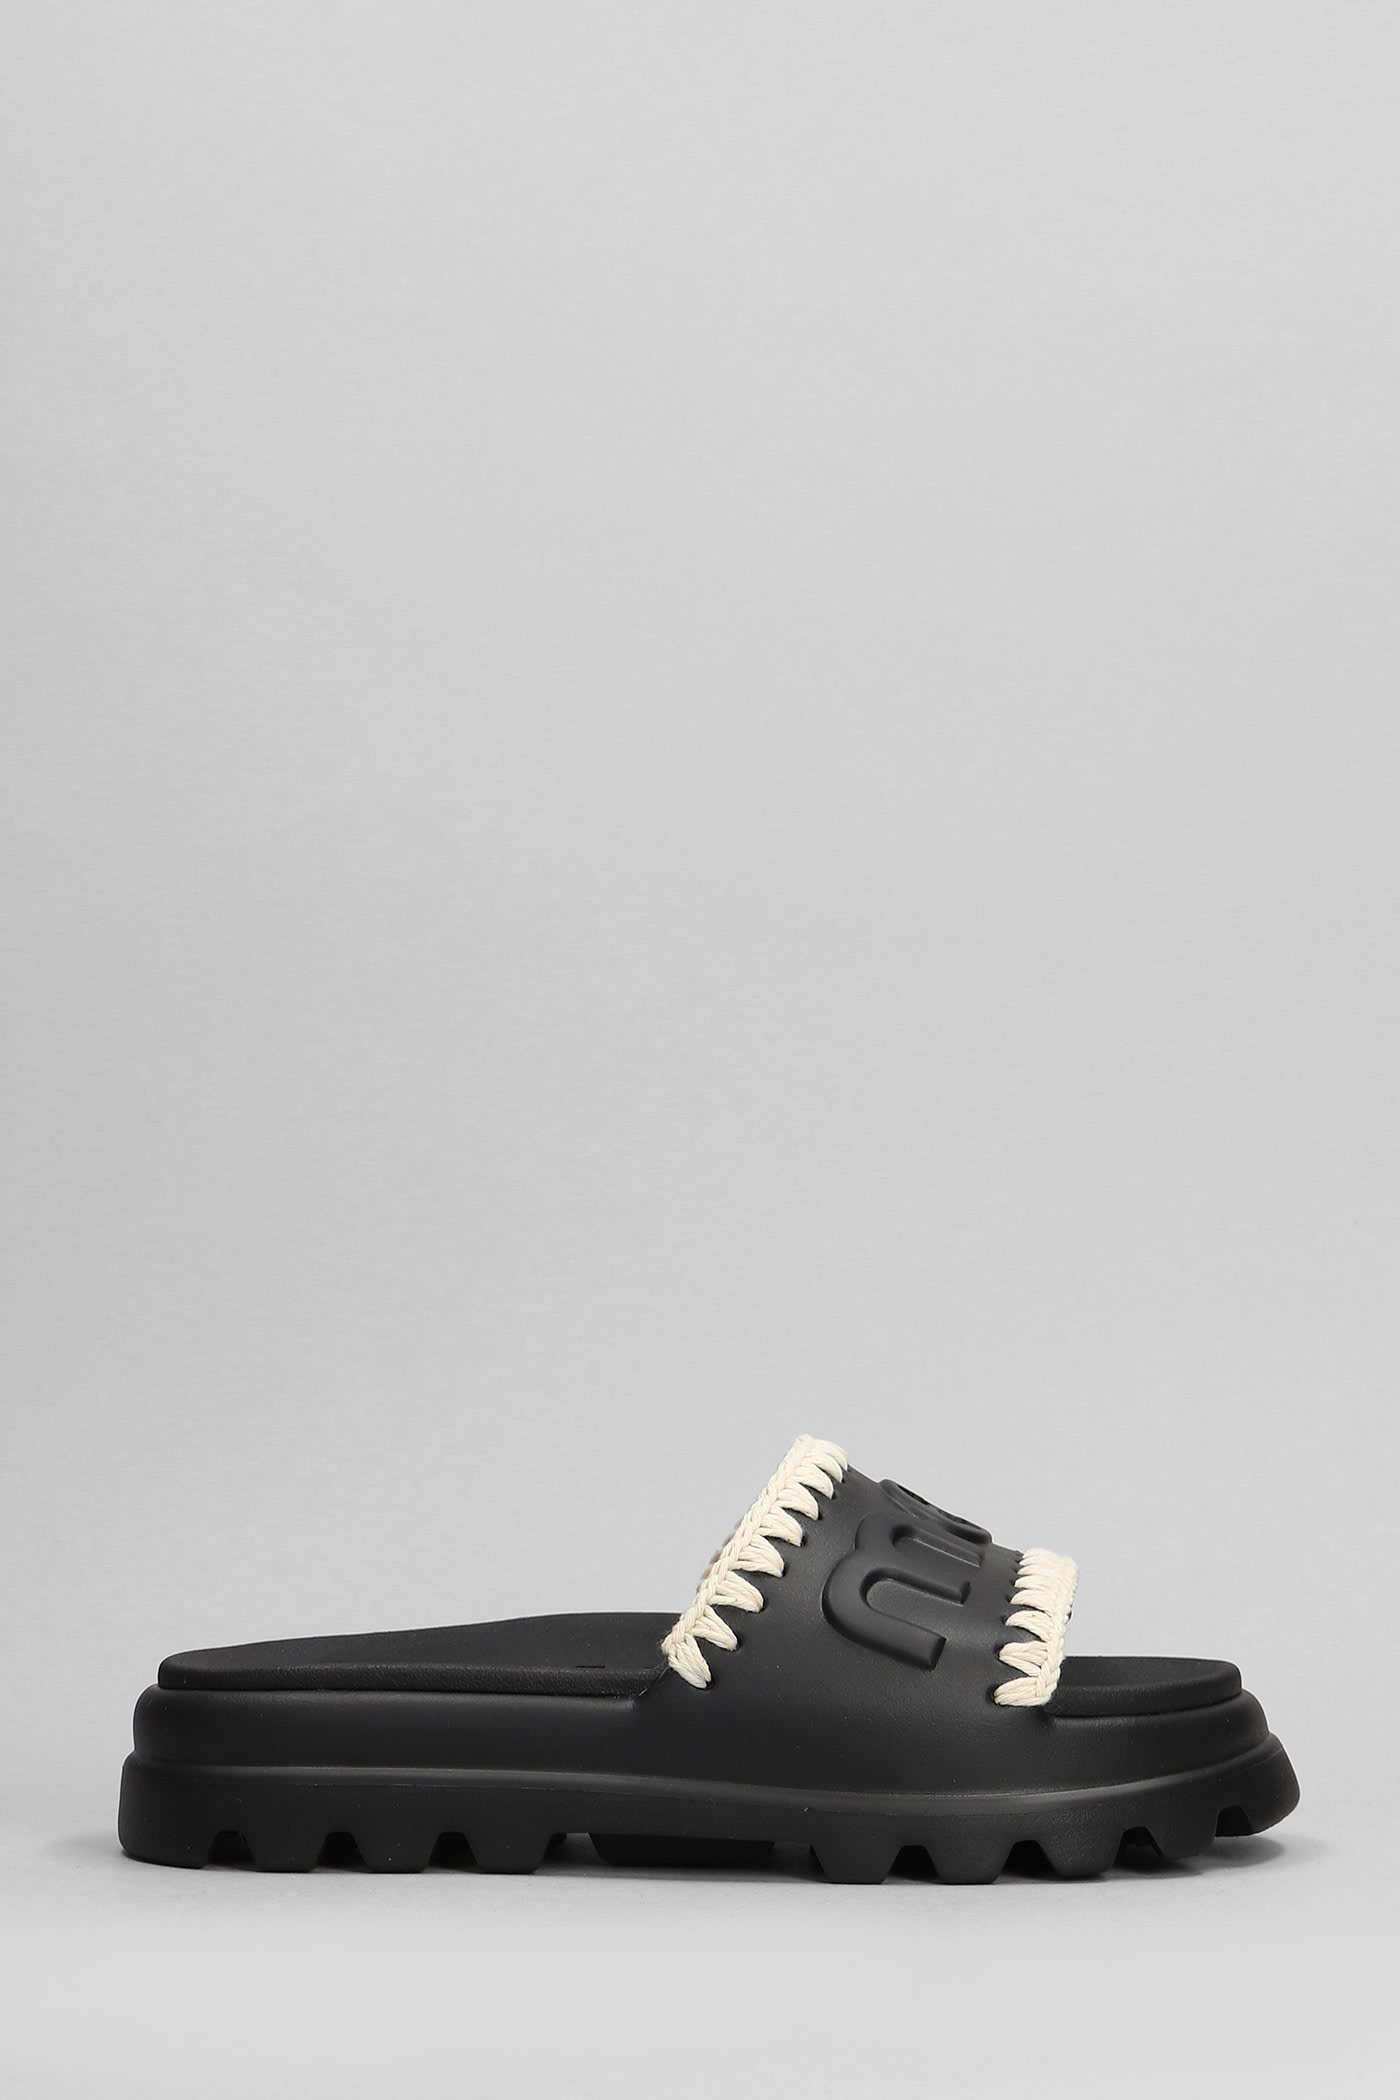 Mou Eva Onepiece Flats In Black Rubber/plasic